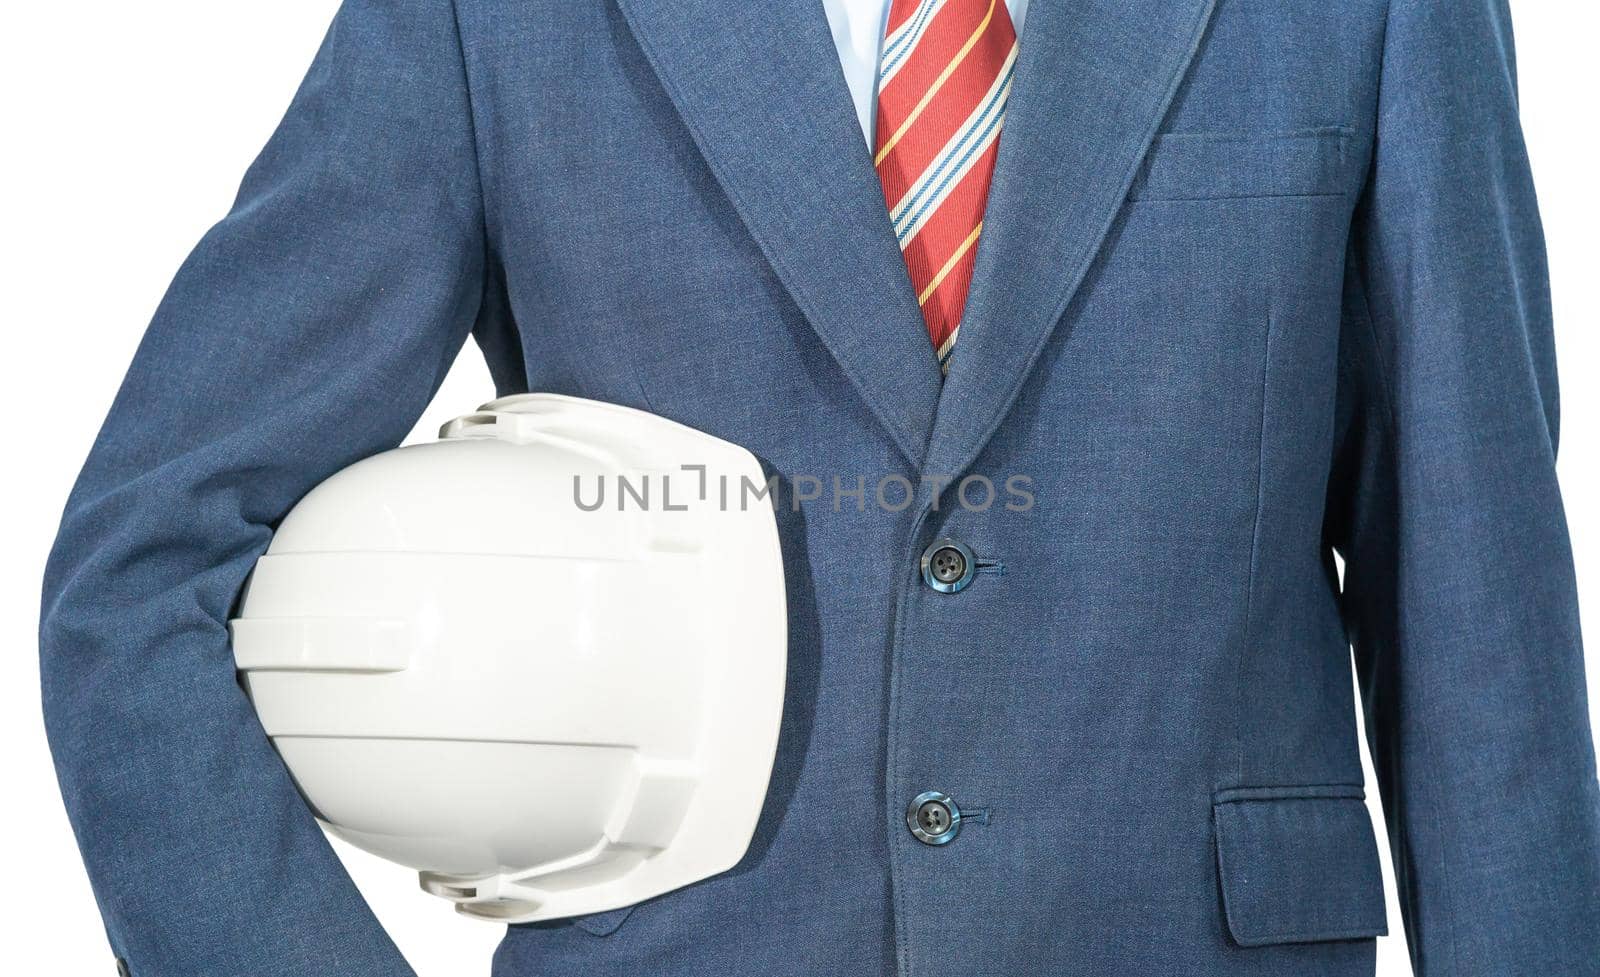 Cloes up man standing in blue suit holding white hardhat isolated on white background